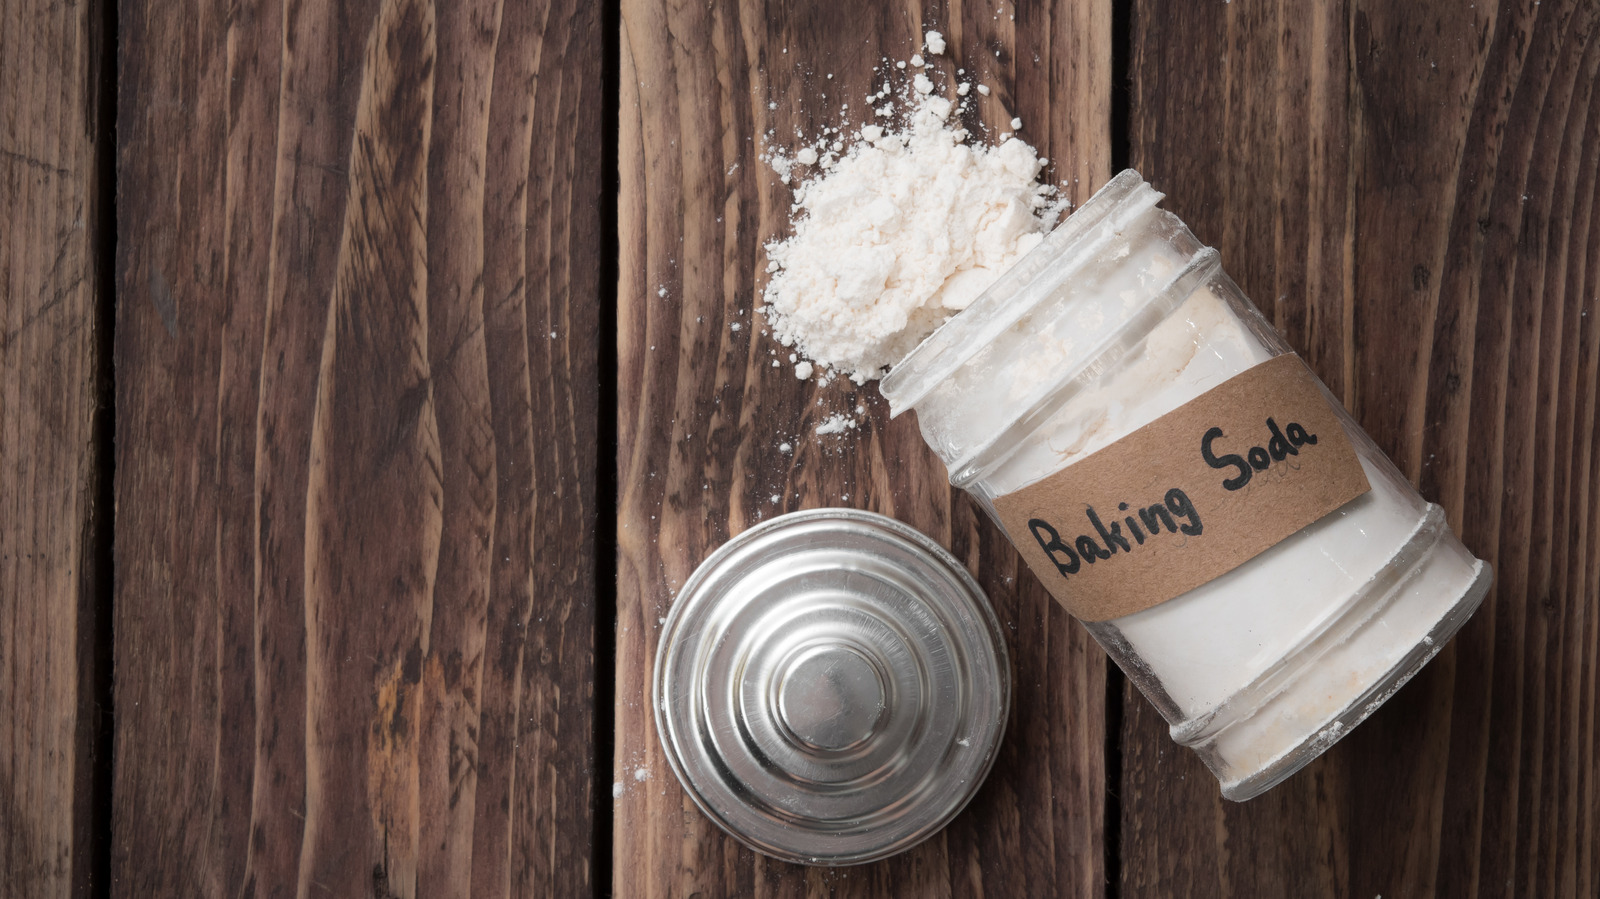 How to Store Baking Soda to Keep It Fresh